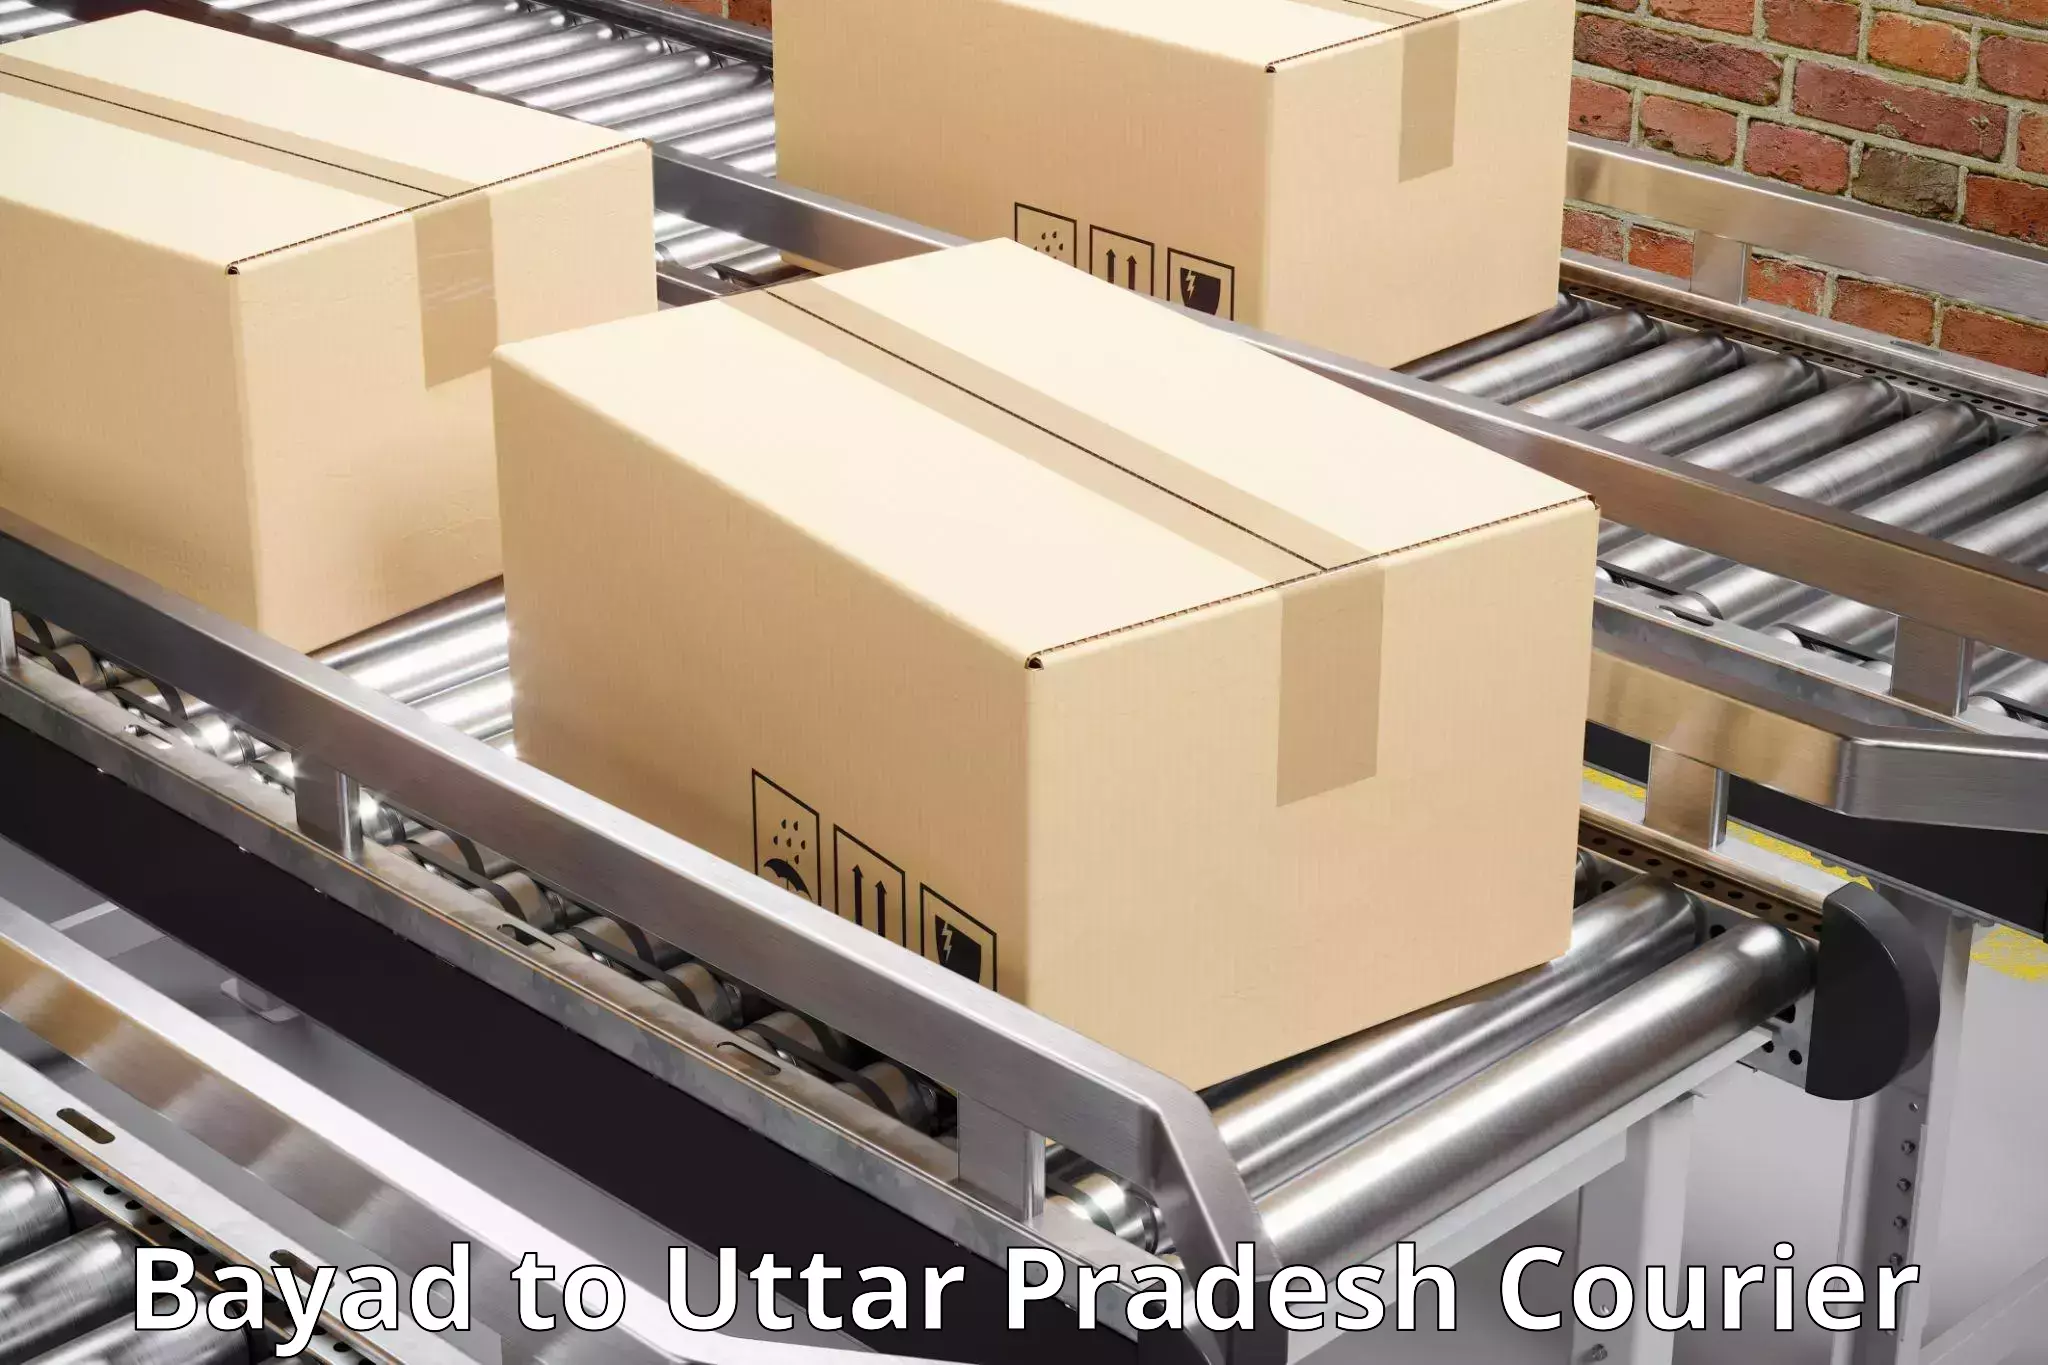 Personalized courier solutions Bayad to Aligarh Muslim University